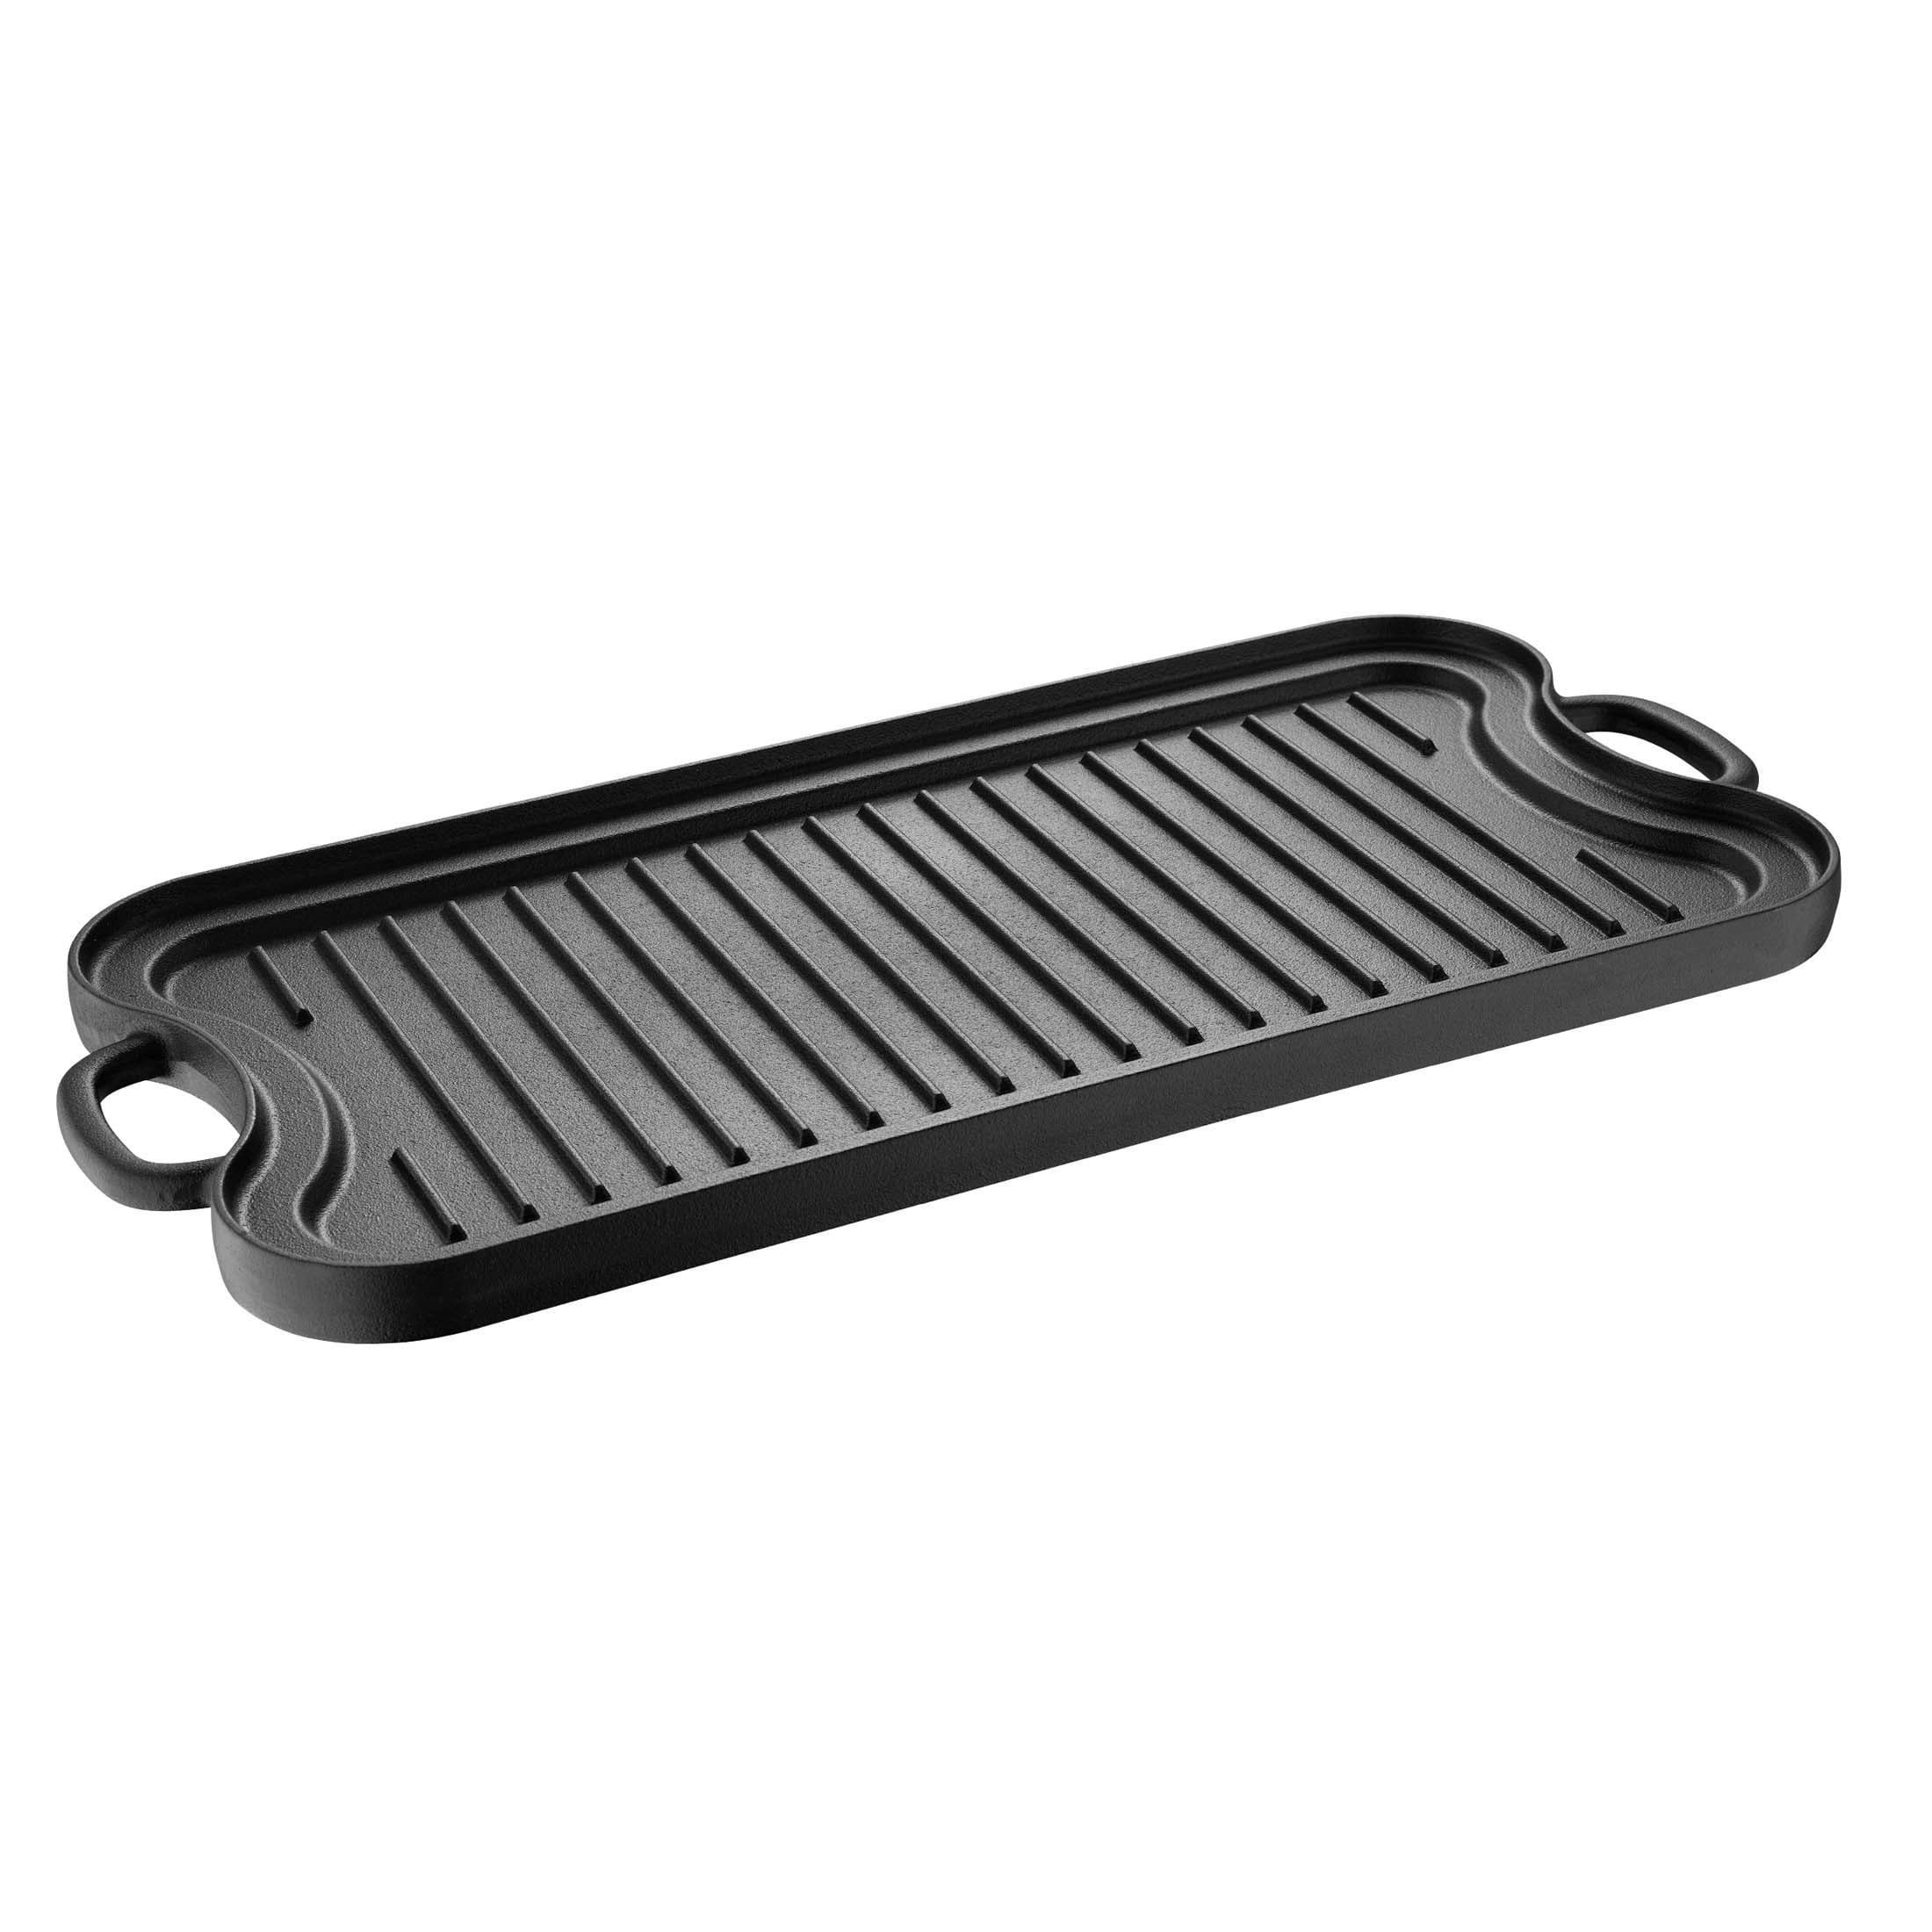 Lodge 20x10.5 Cast Iron Reversible Grill/Griddle Gray